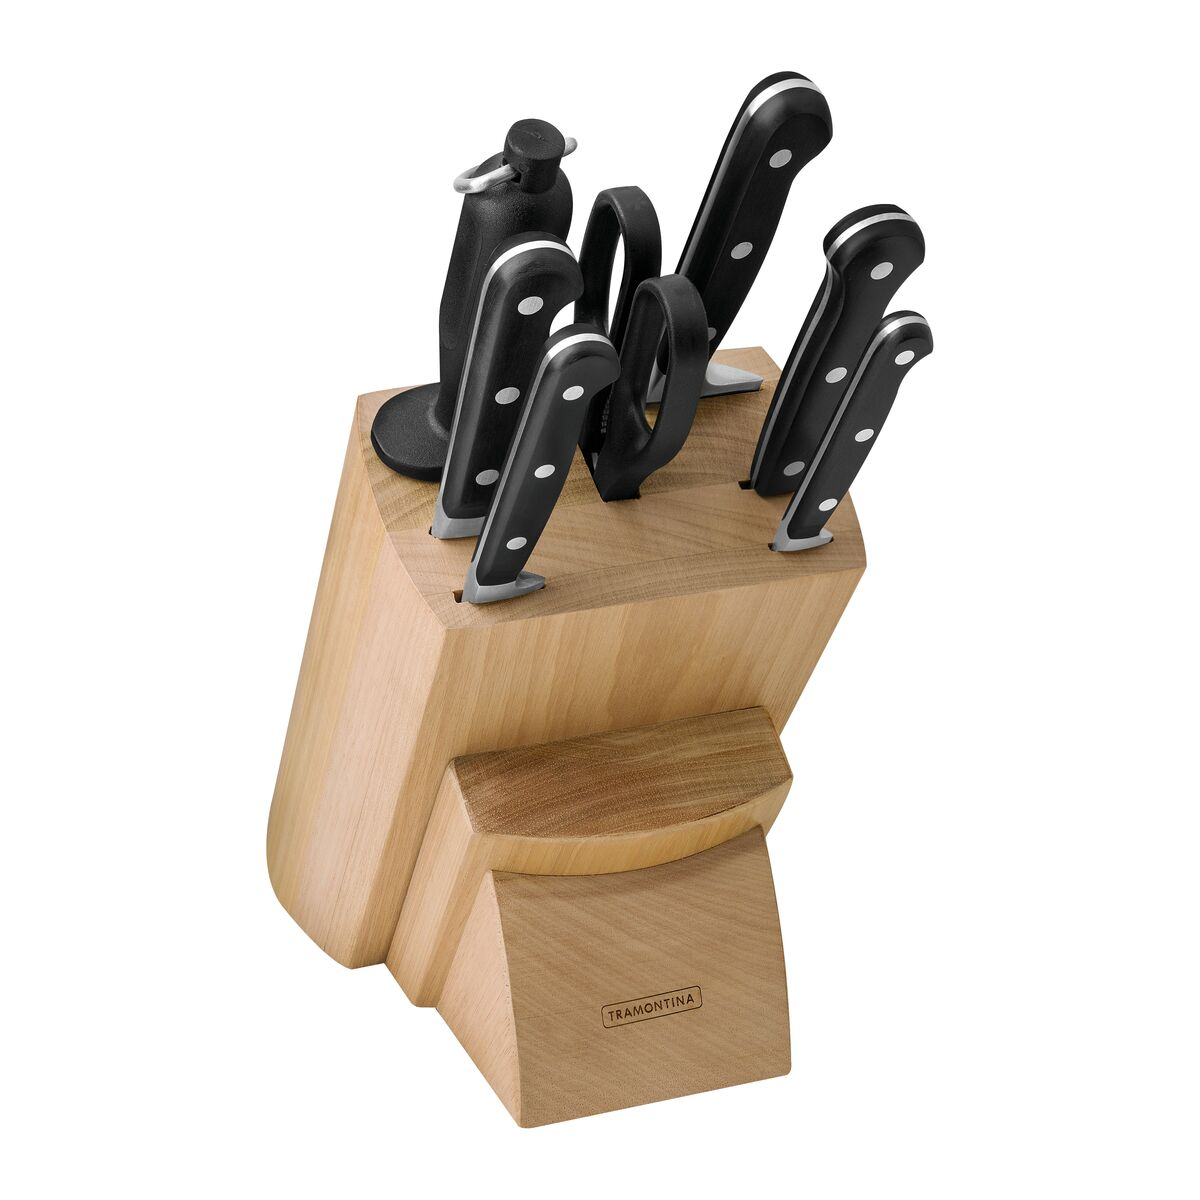 Tramontina Century Knife Set with Stainless Steel Blades, Polycarbonate and Fiberglass Handles, and Wooden Holder, 8 Piece Set